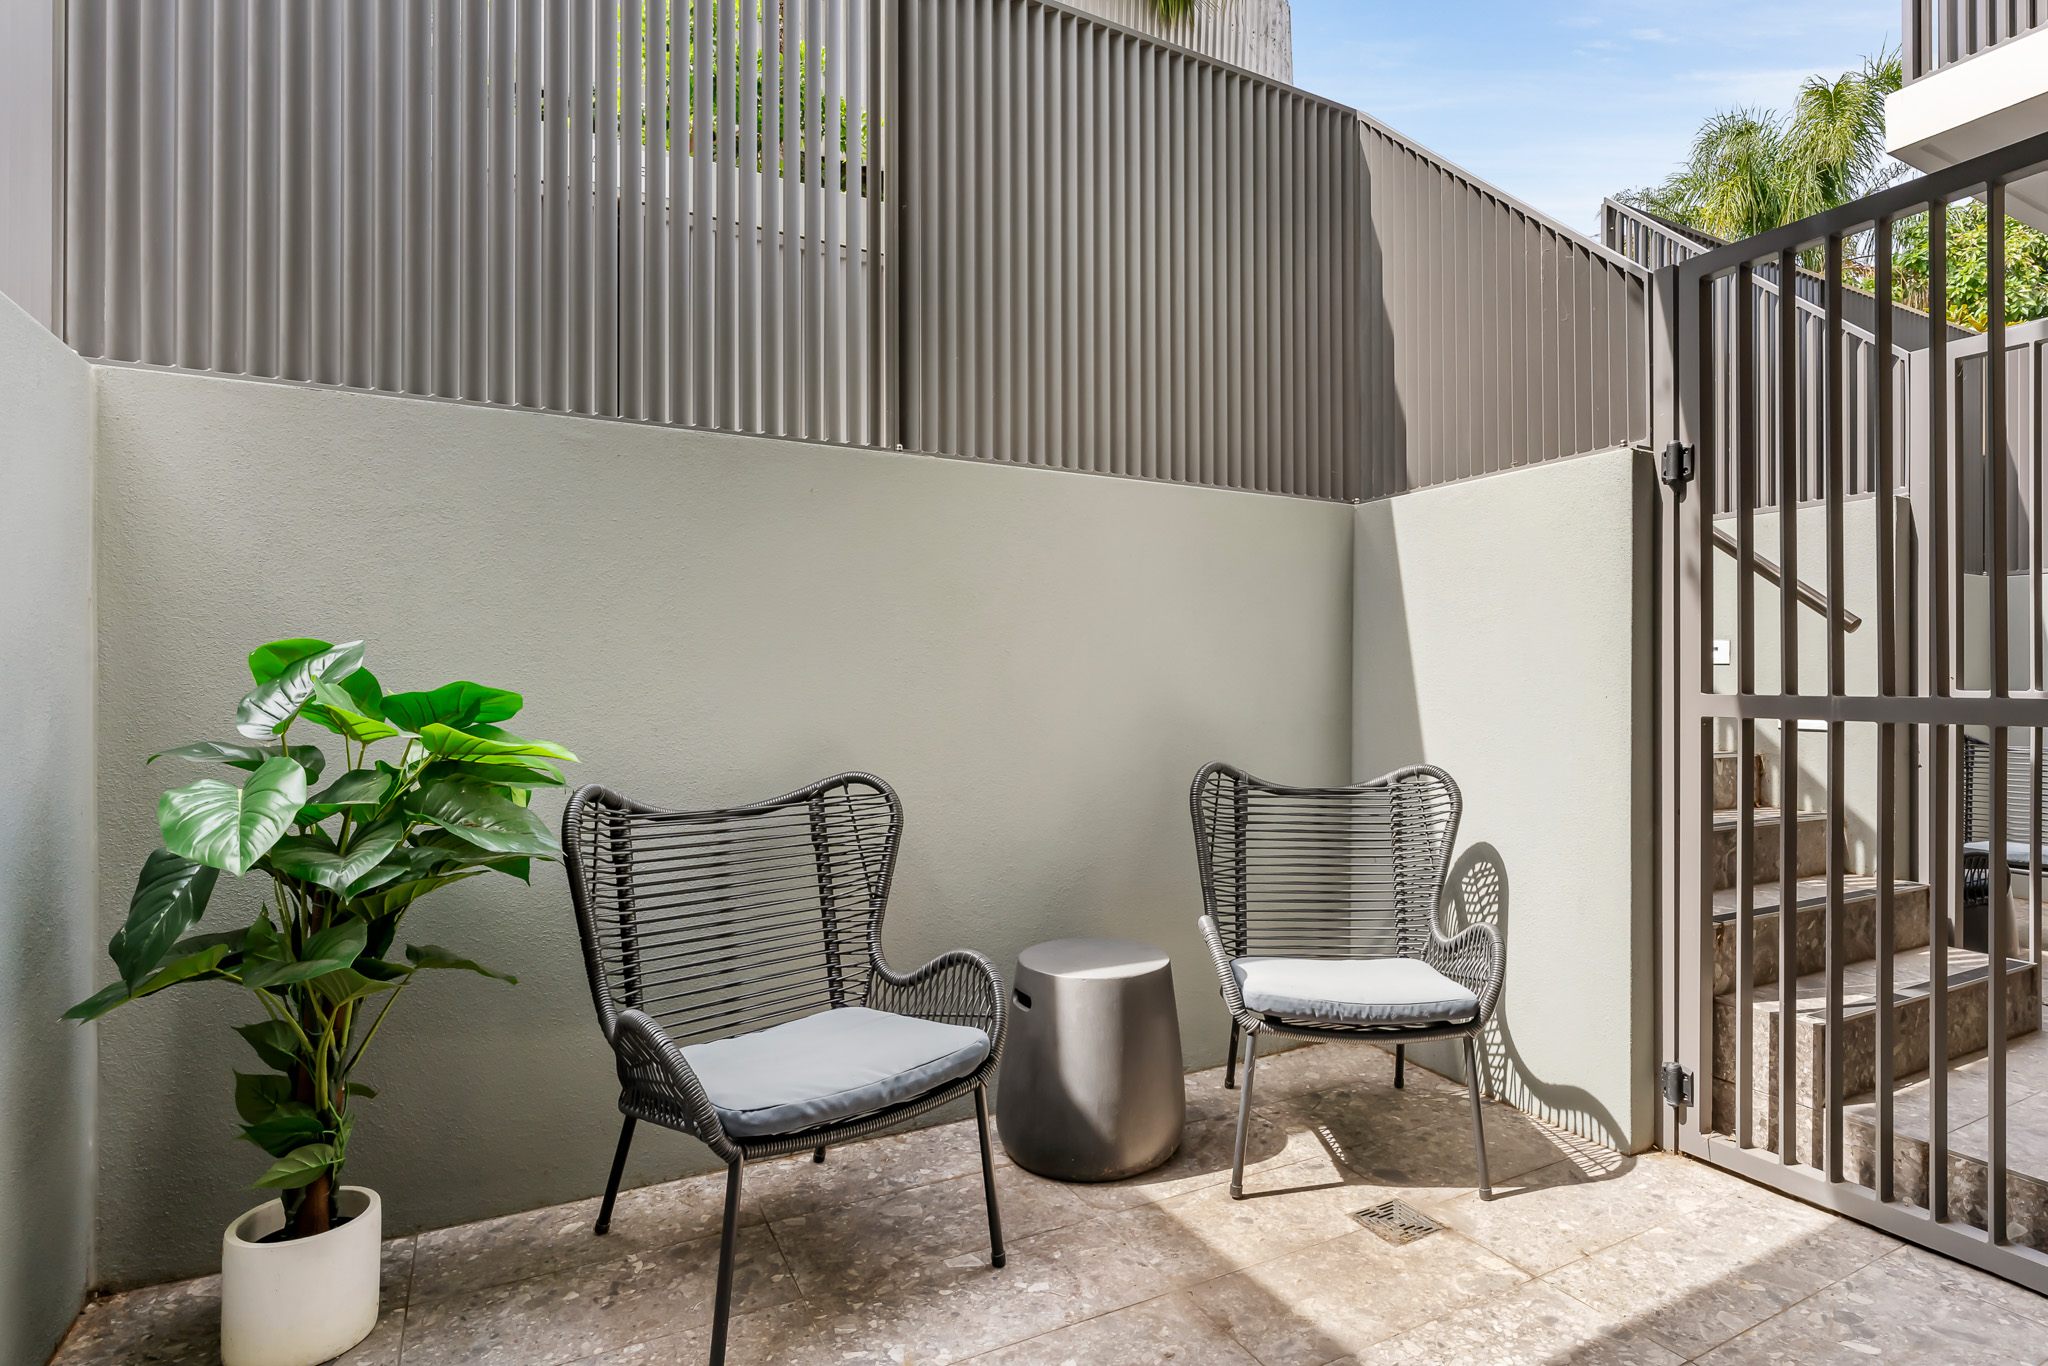 Courtyard, One Bedroom Apartment at Barangaroo Park Apartments by Urban Rest, Sydney